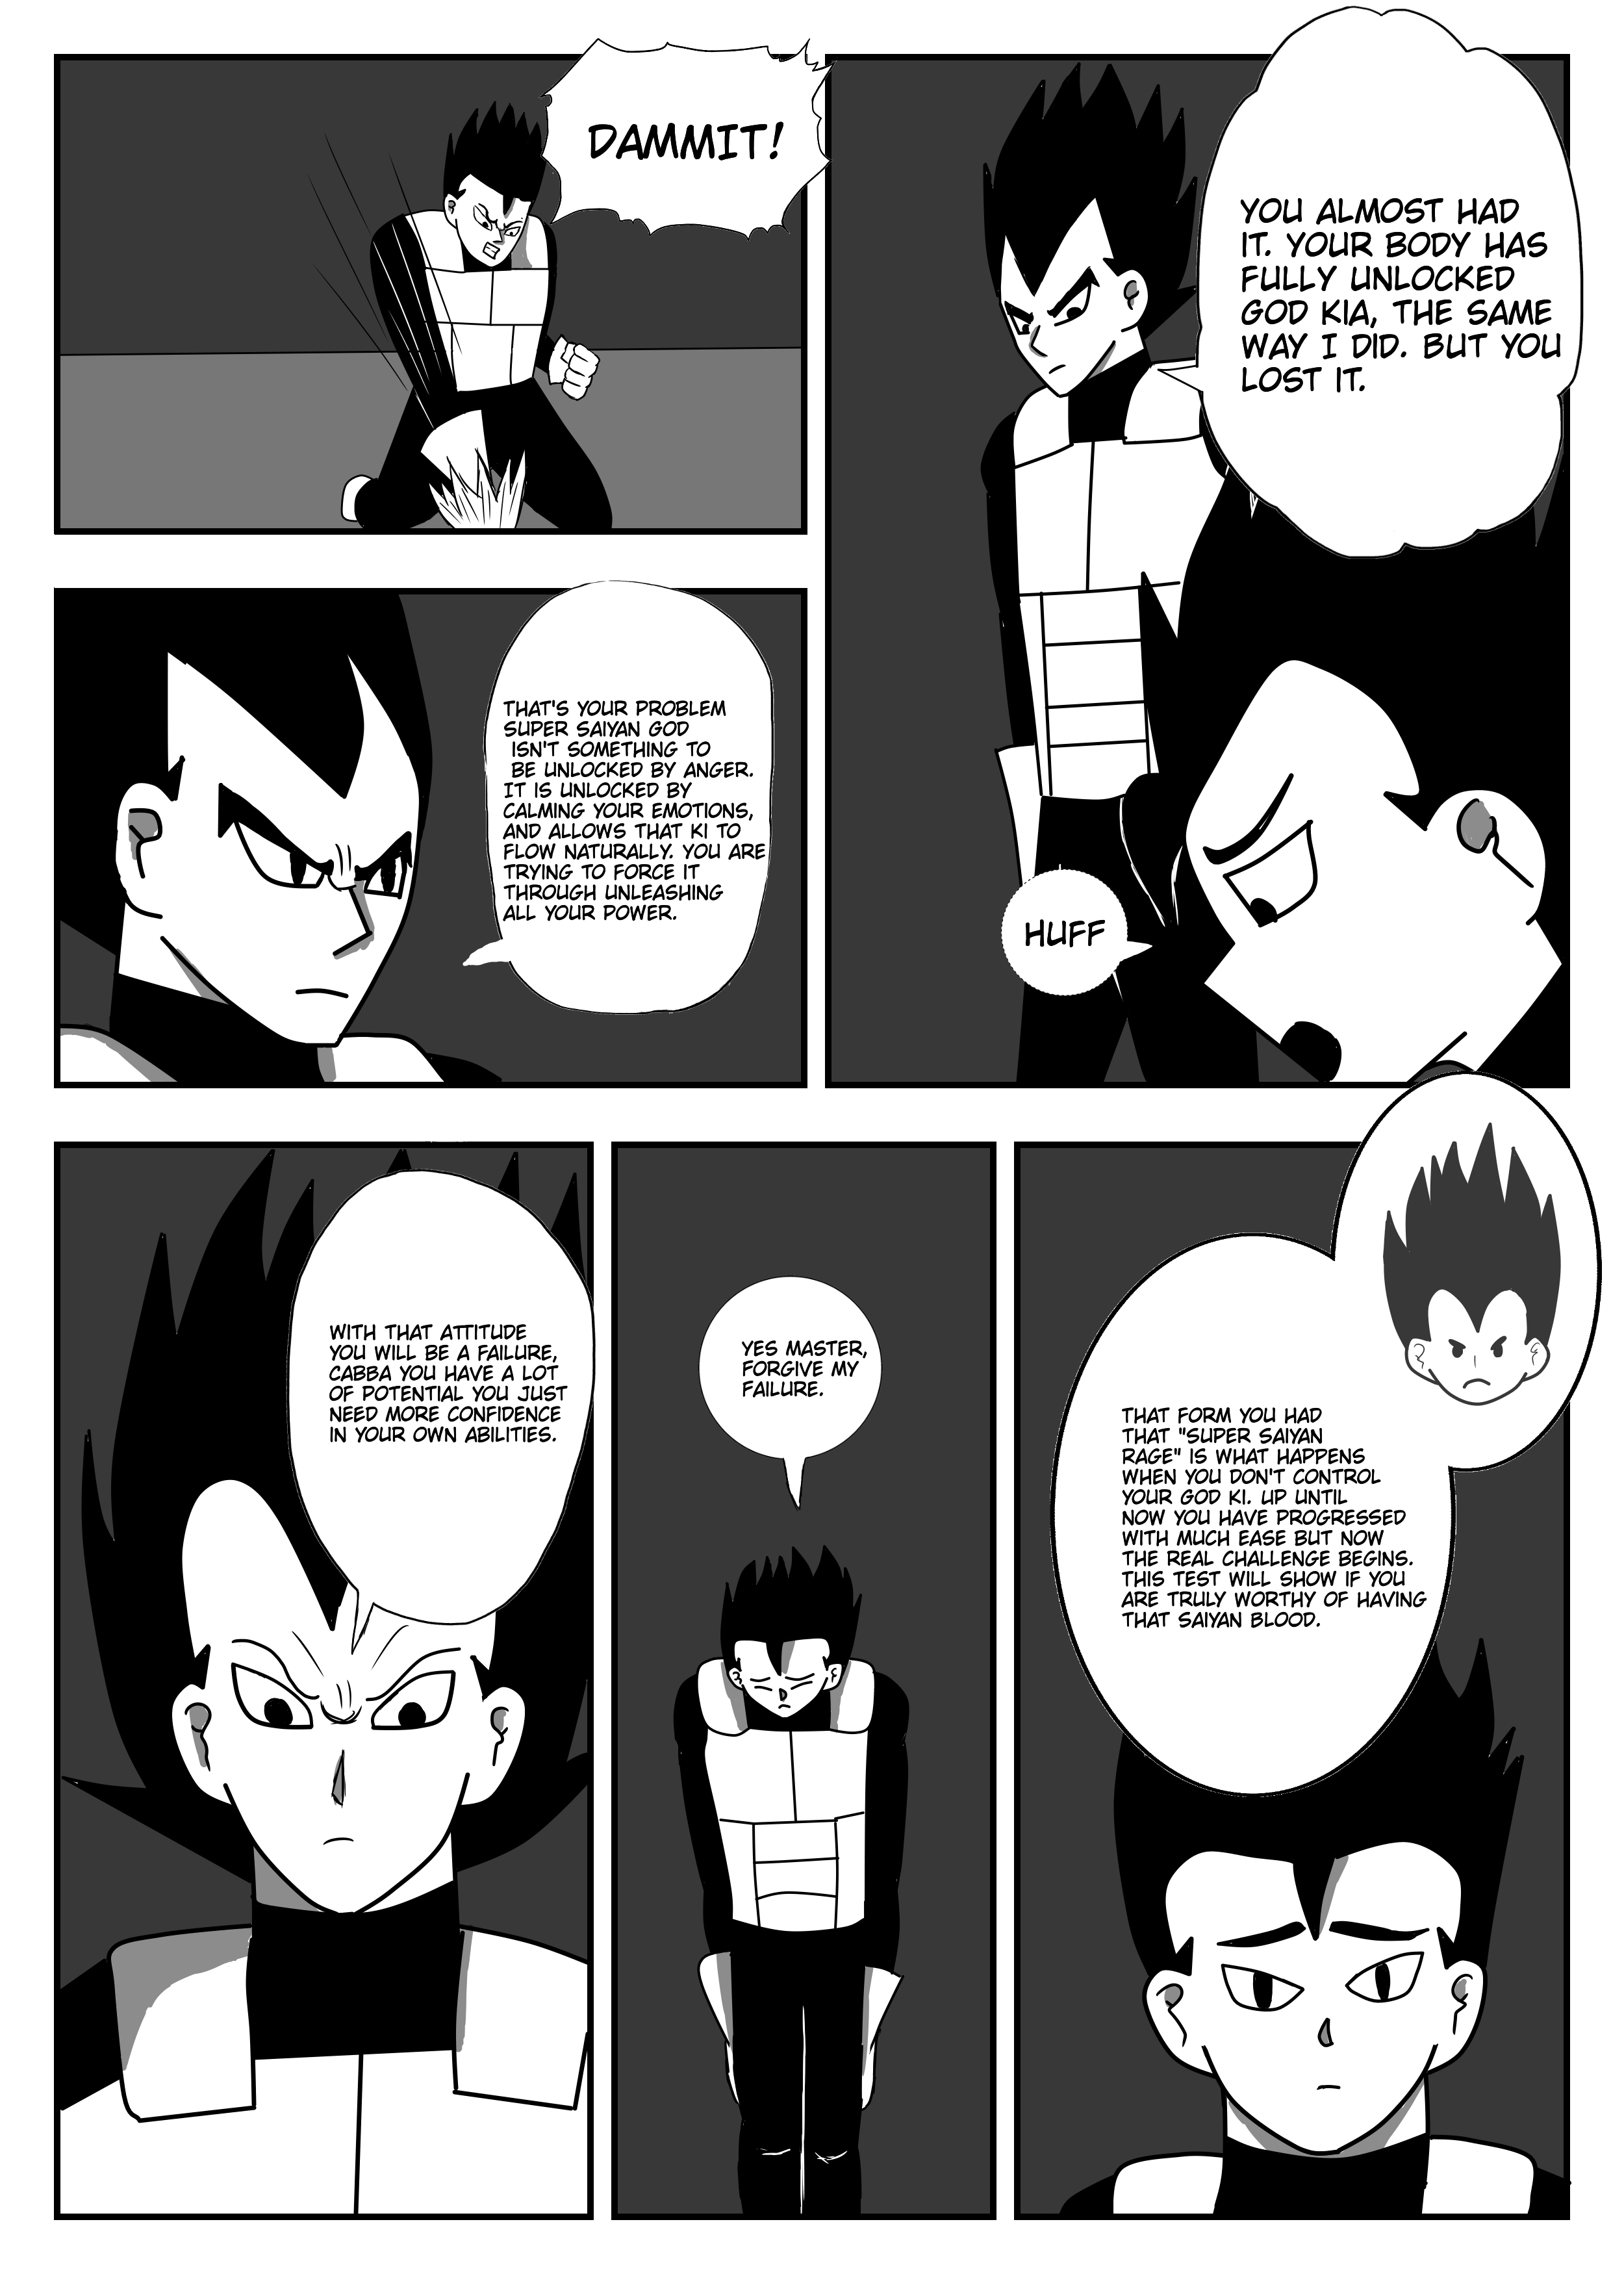 Dragon Ball New Blood Ch 1 Page 12 By Sam Well On Deviantart